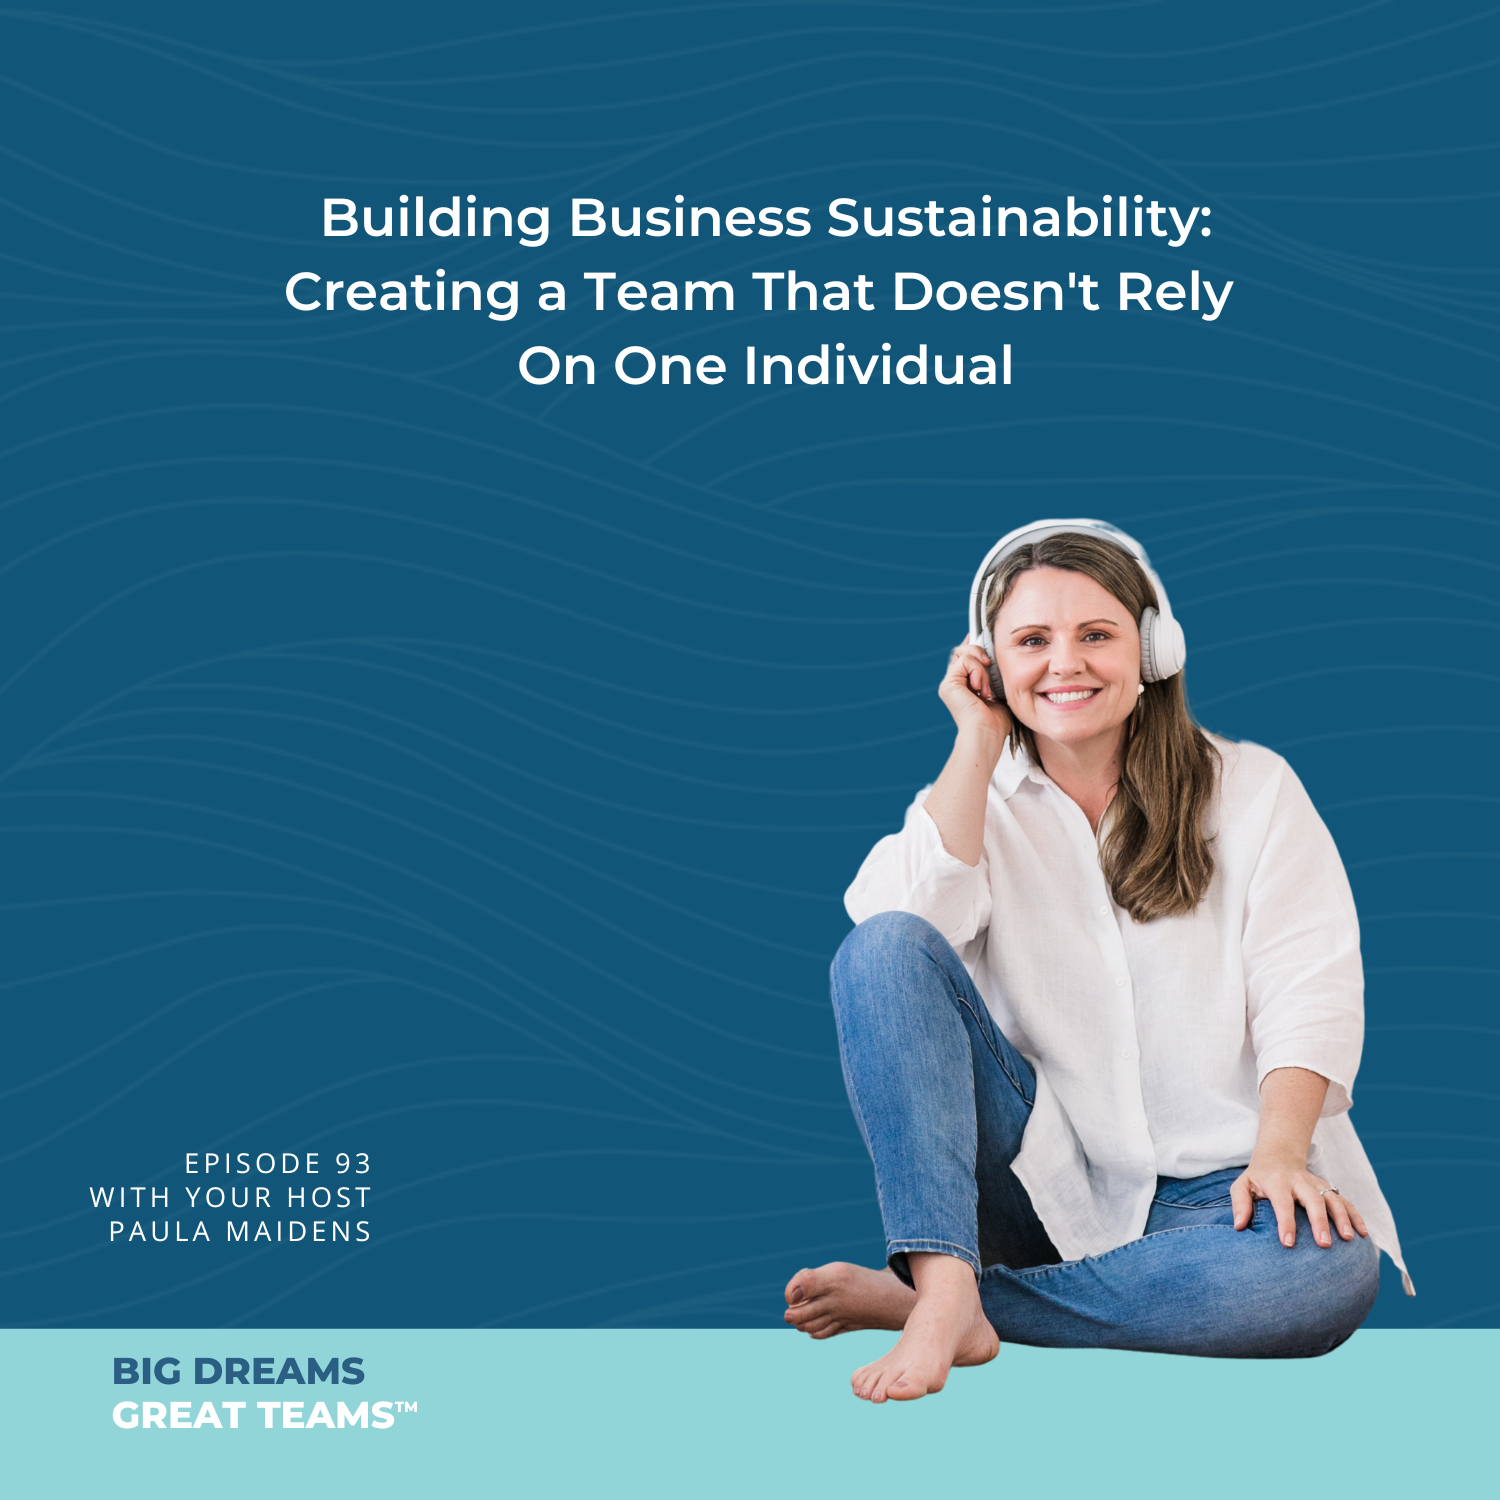 Episode #93 - Building Business Sustainability: Creating a Team That Doesn't Rely On One Individual